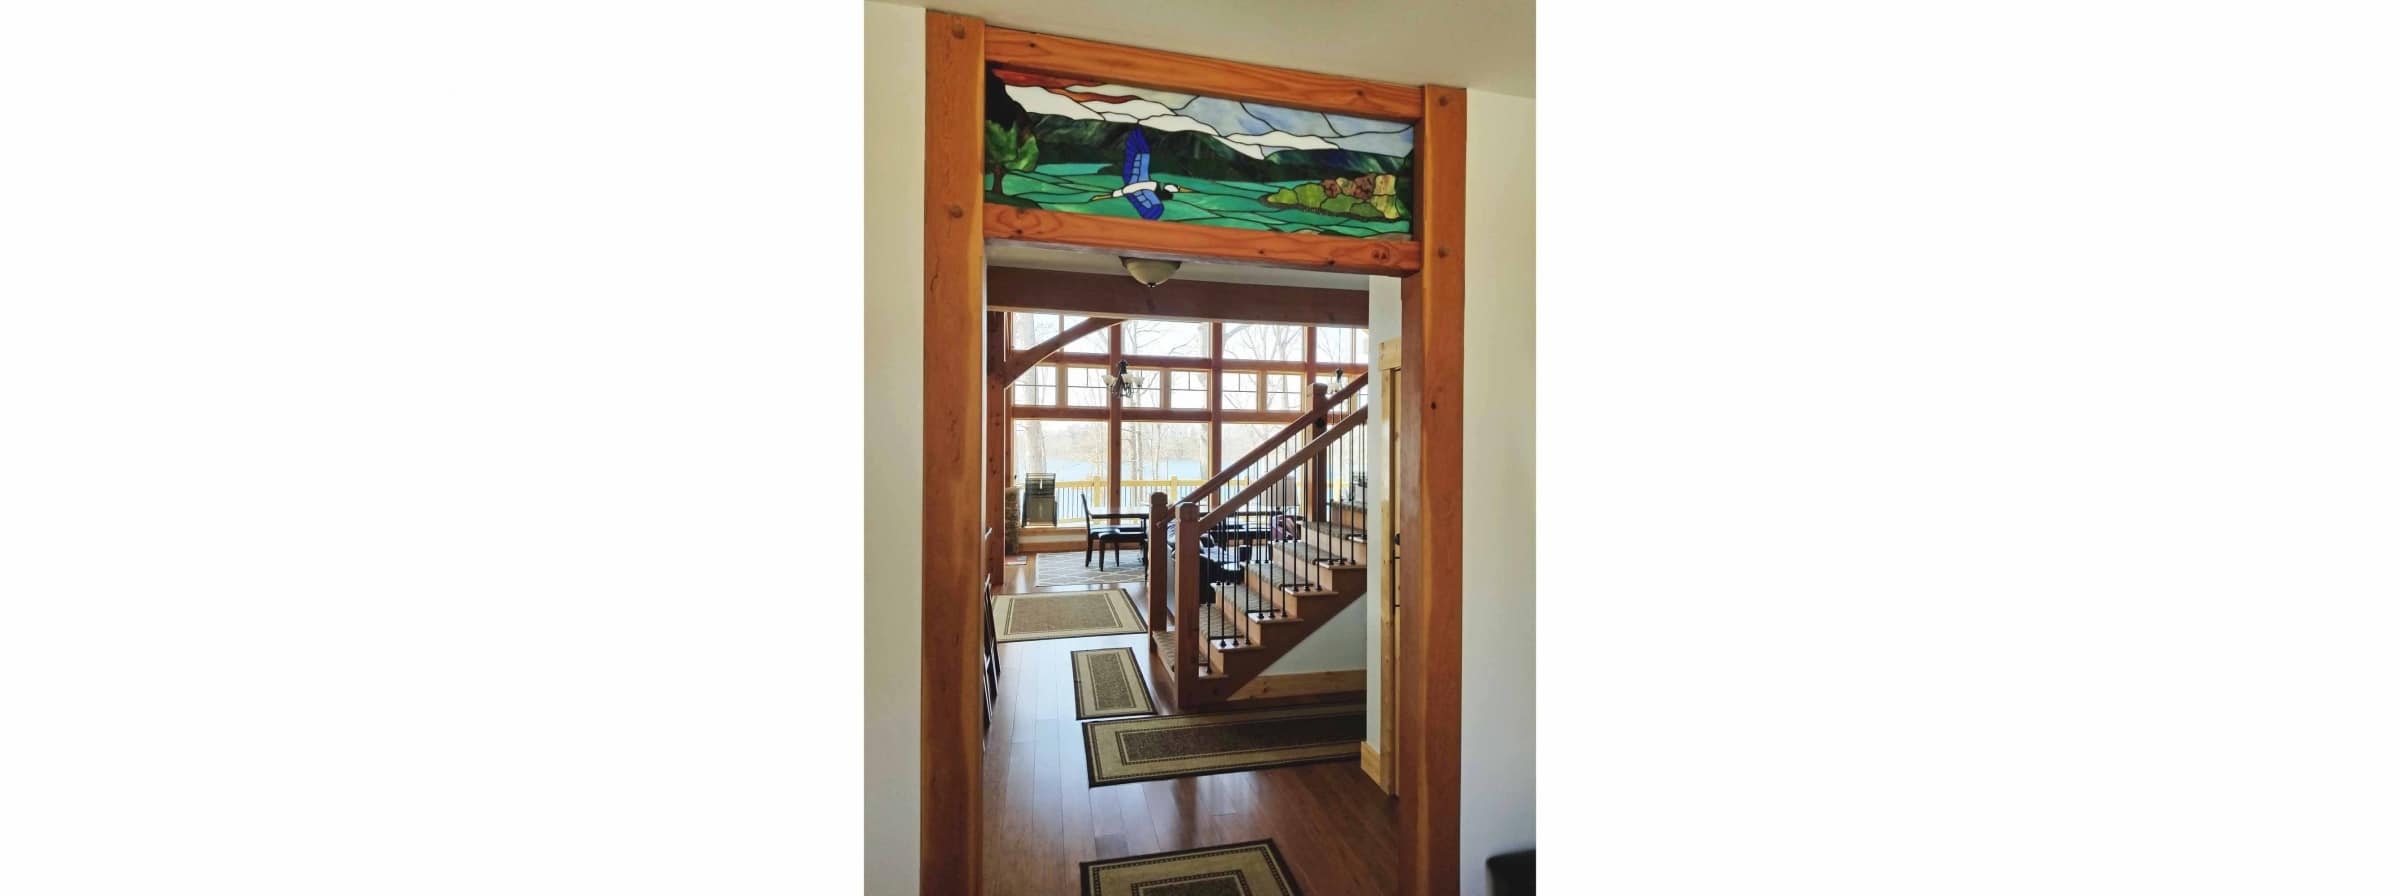 image of blue heron over Smith Mountain Lake featured as a transom at foyer of Heron Point; stained glass artwork by SER Art in Moneta; builder Timber Ridge Craftsmen Inc